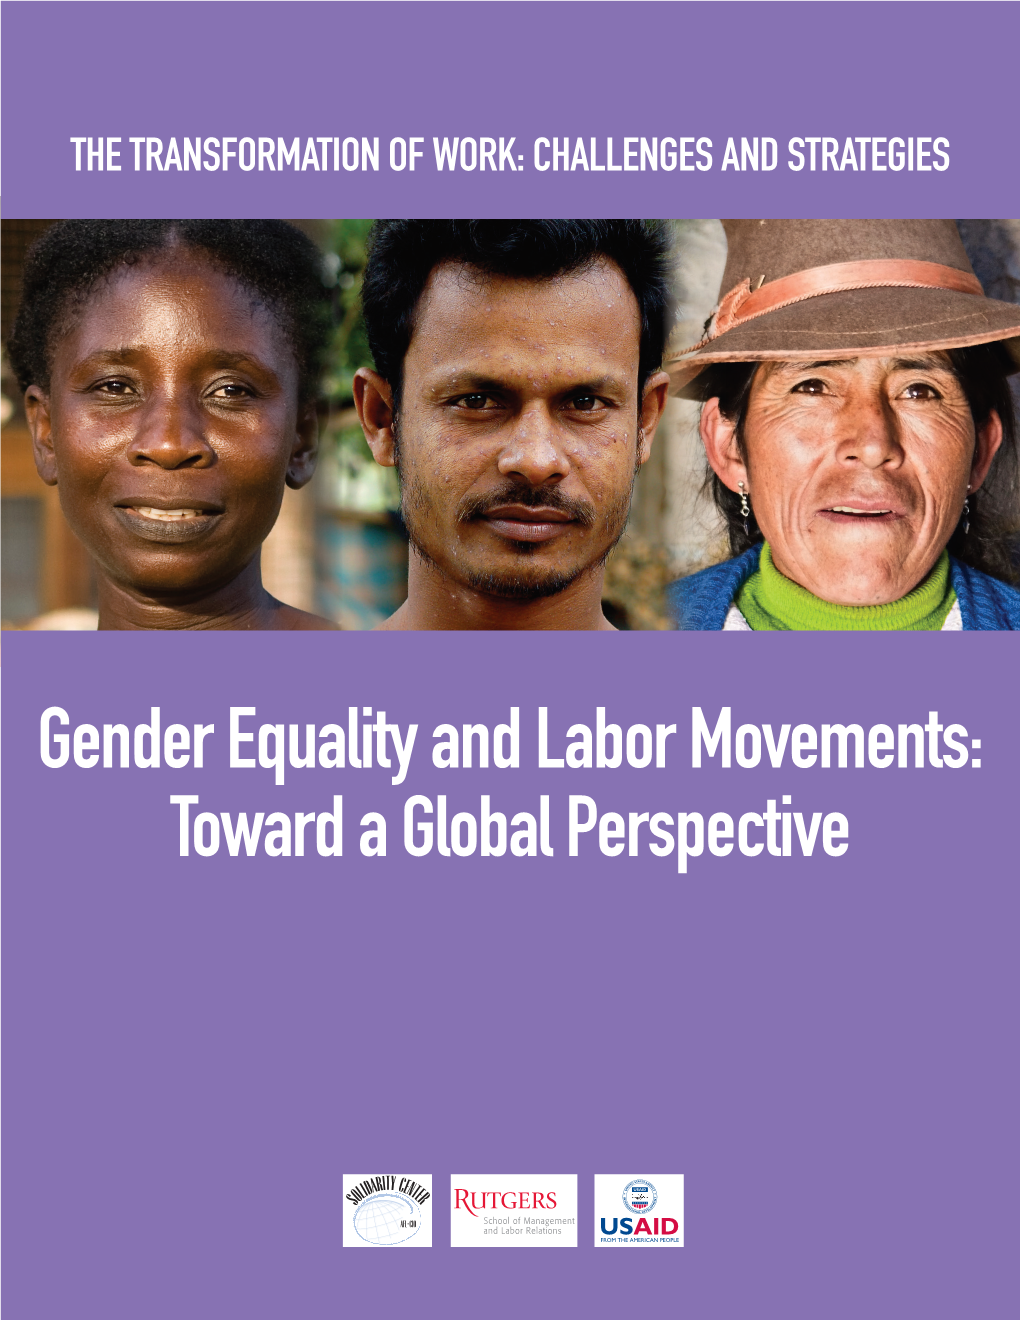 Gender Equality and Labor Movements: Toward A